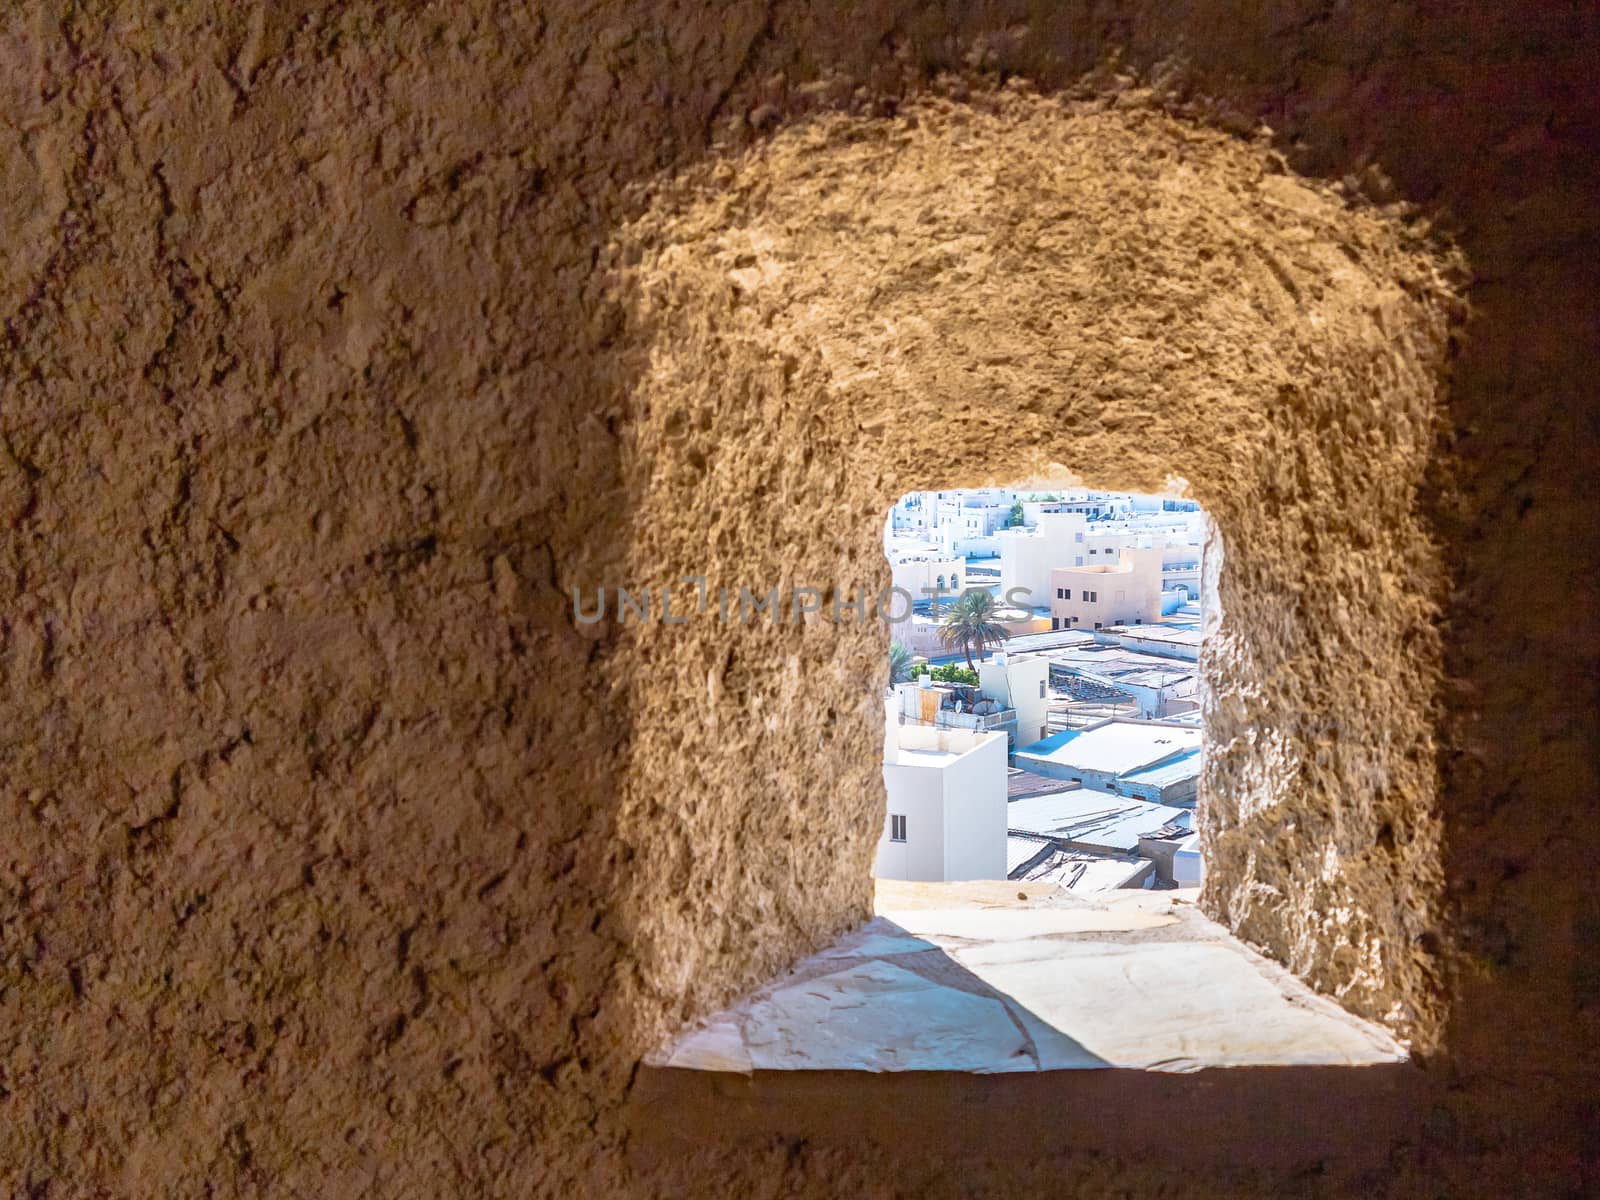 View of the city of Muscat, the capital of Oman through the loophole of Fort Muttrah.